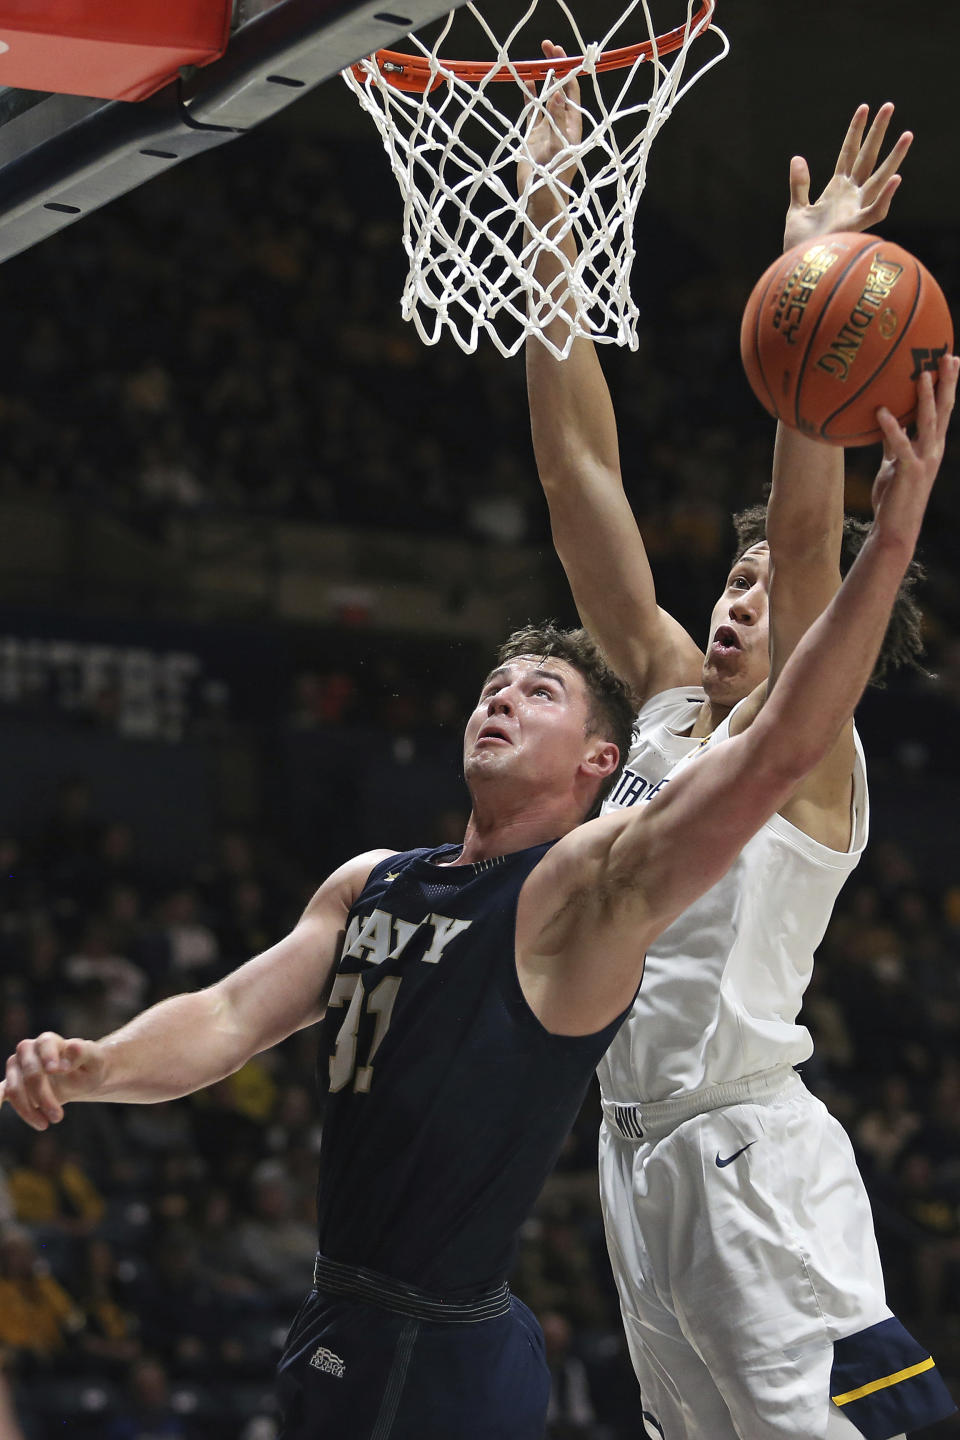 Navy forward Daniel Deaver (31) is defended by West Virginia forward James Okonkwo during the first half of an NCAA college basketball game in Morgantown, W.Va., Wednesday, Dec. 7, 2022. (AP Photo/Kathleen Batten)